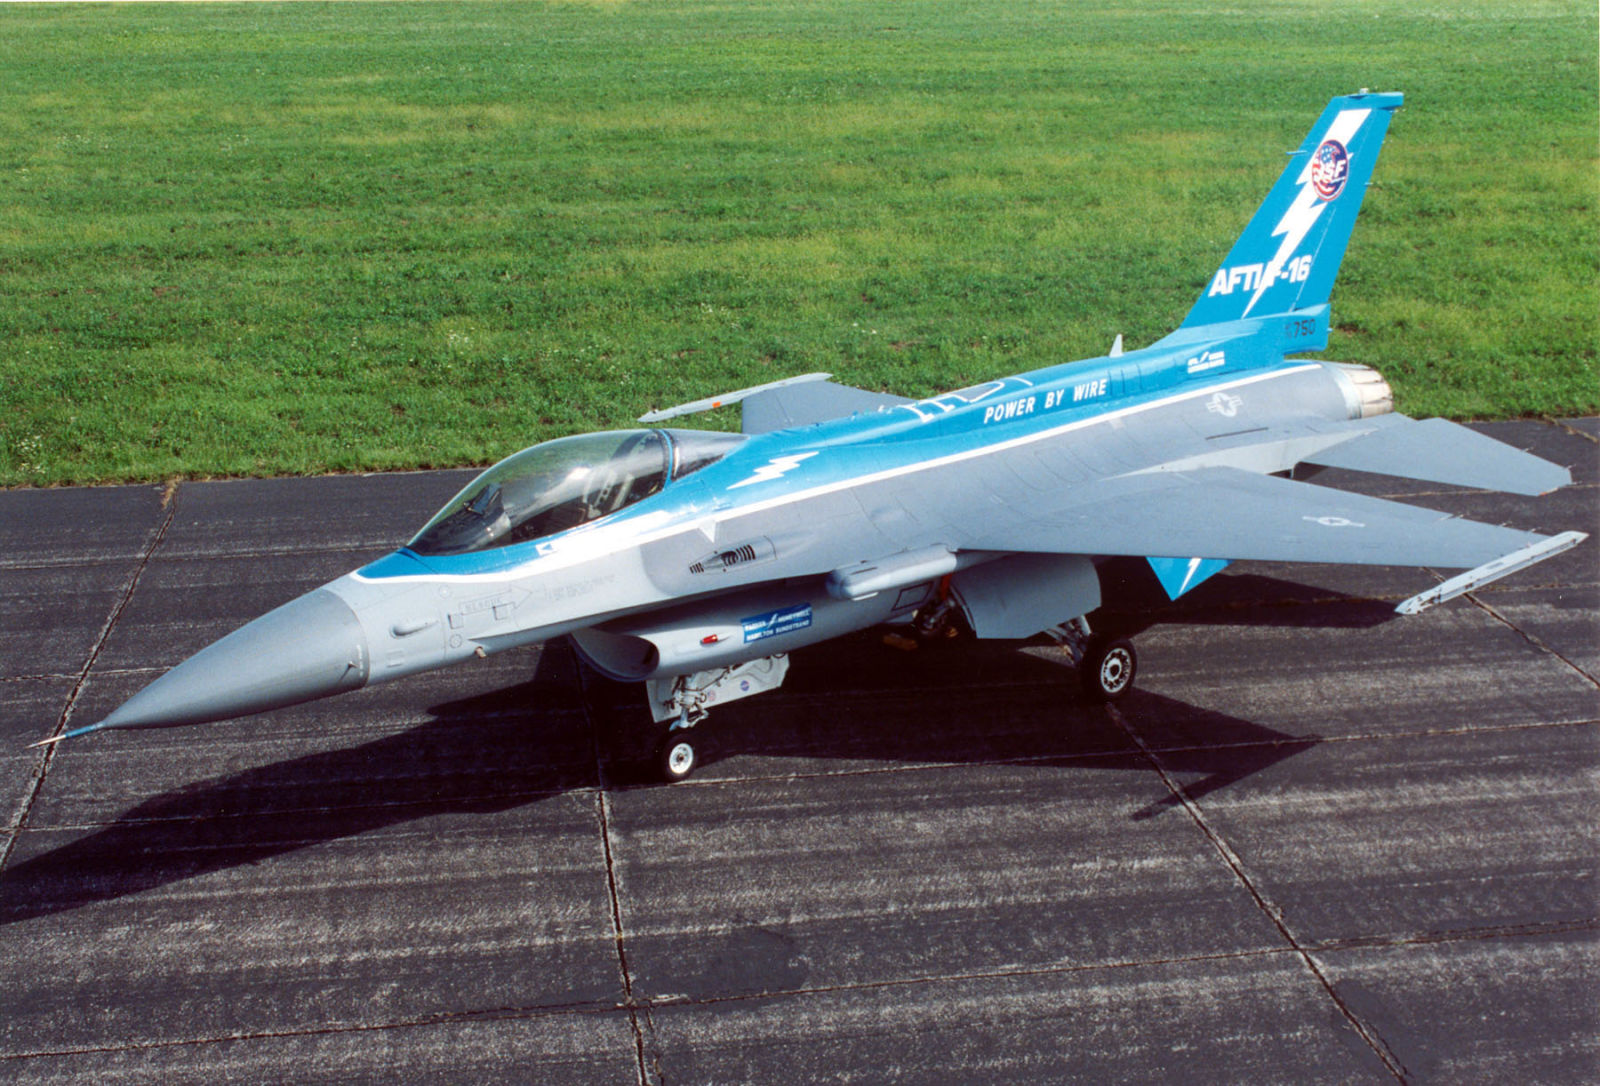 The F-16 AFTI in its final configuration, after being delivered to the USAF Museum